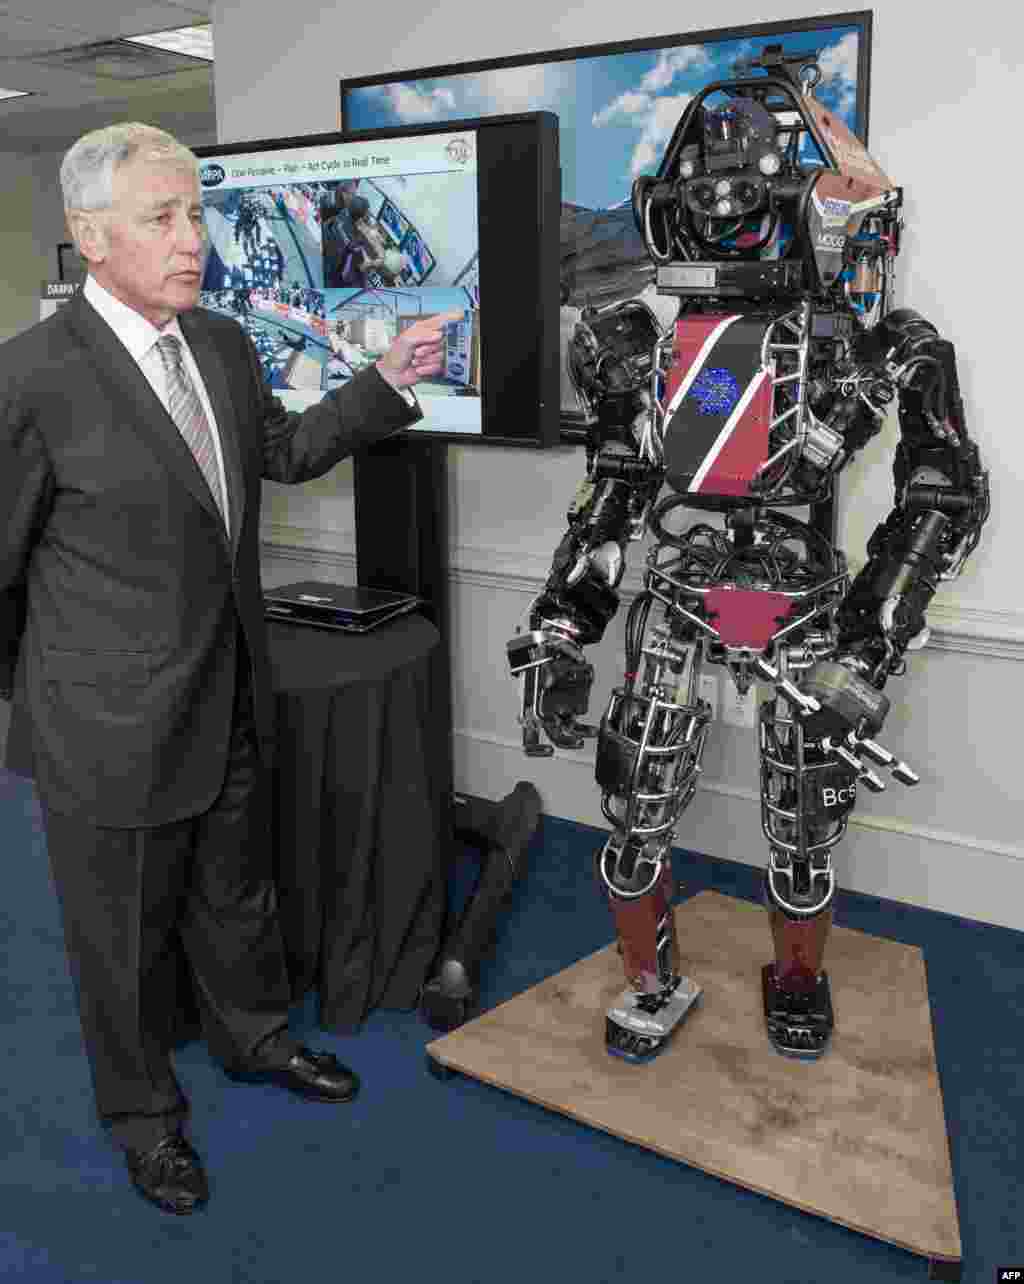 US Secretary of Defense Chuck Hagel is briefed on the ATLAS ROBOT which is one of the most advanced humanoid robots ever built at the Pentagon by Defense Advanced Research Projects Agency(DARPA) personnel, April 22, 2014.